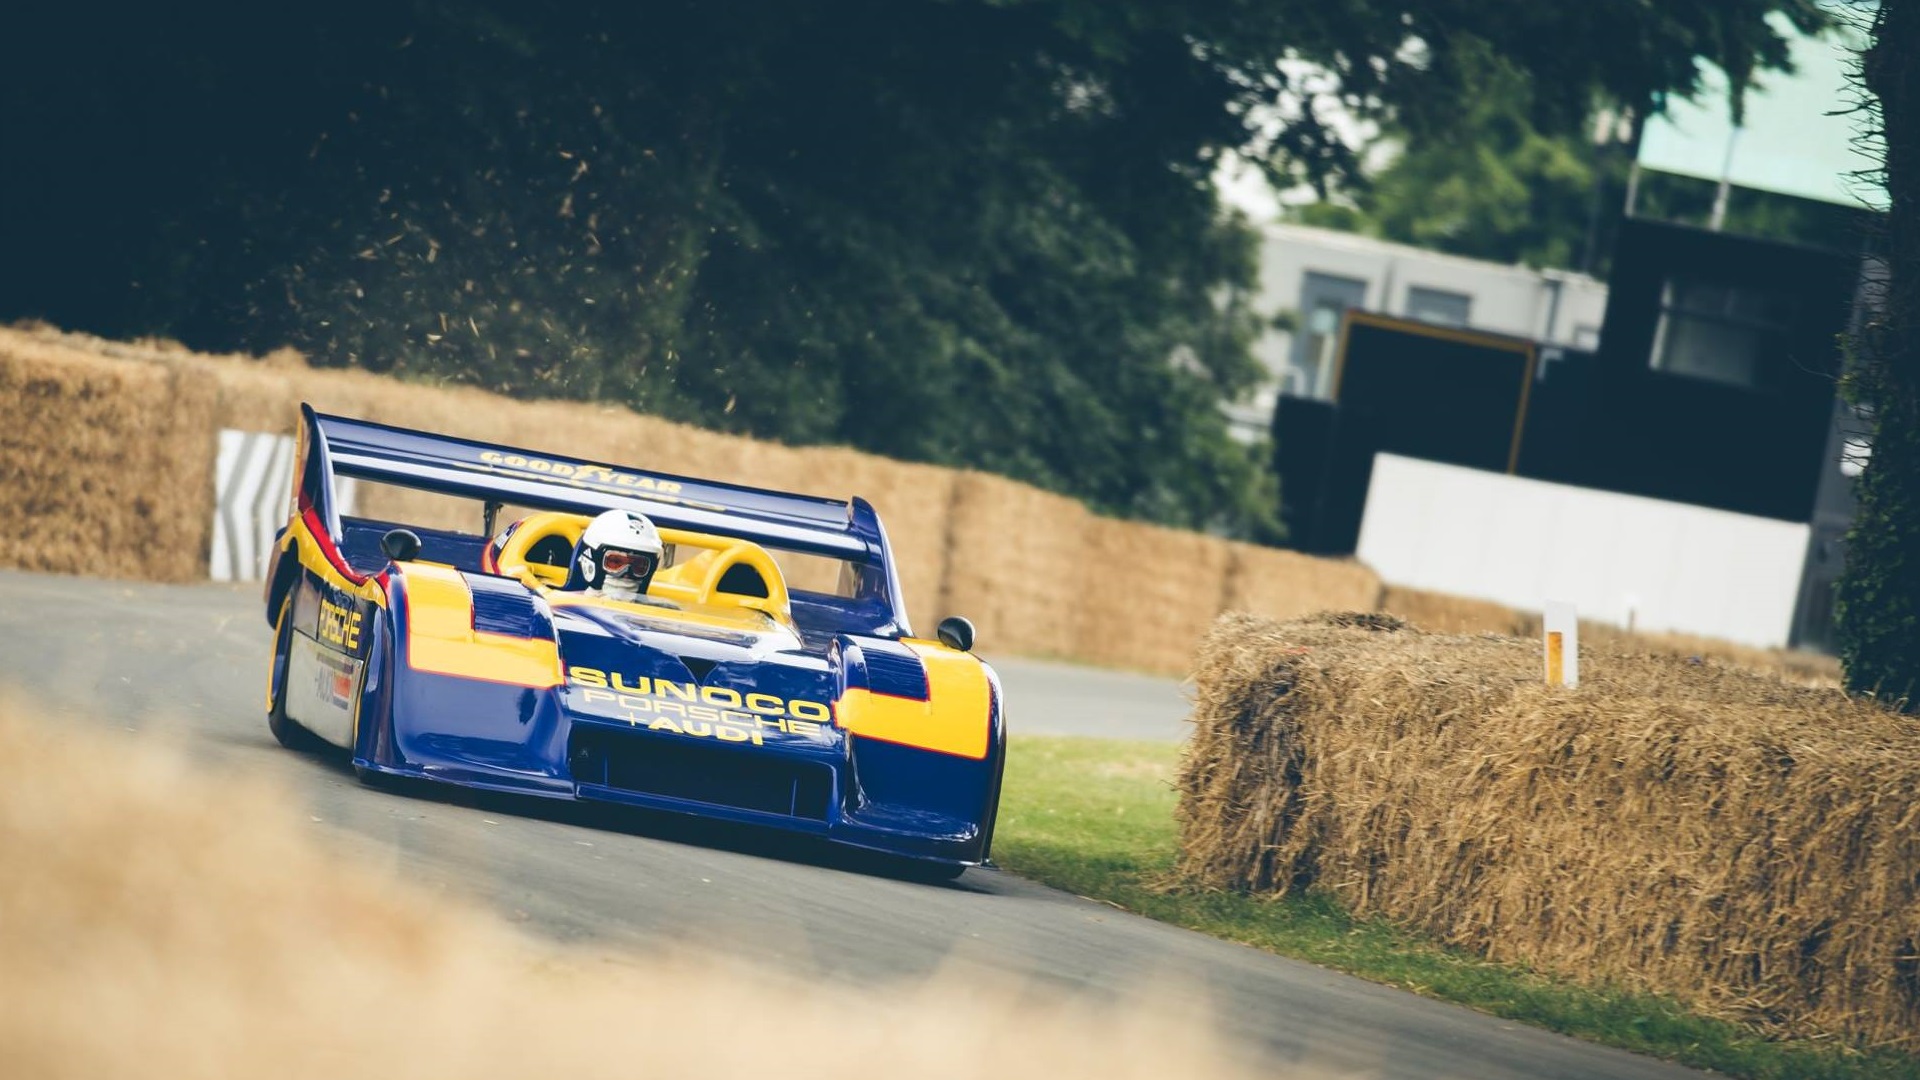 Goodwood Festival Of Speed Porsche 917 Race Cars Can Am Car Vehicle Hay Trees Blue Cars Audi 1920x1080